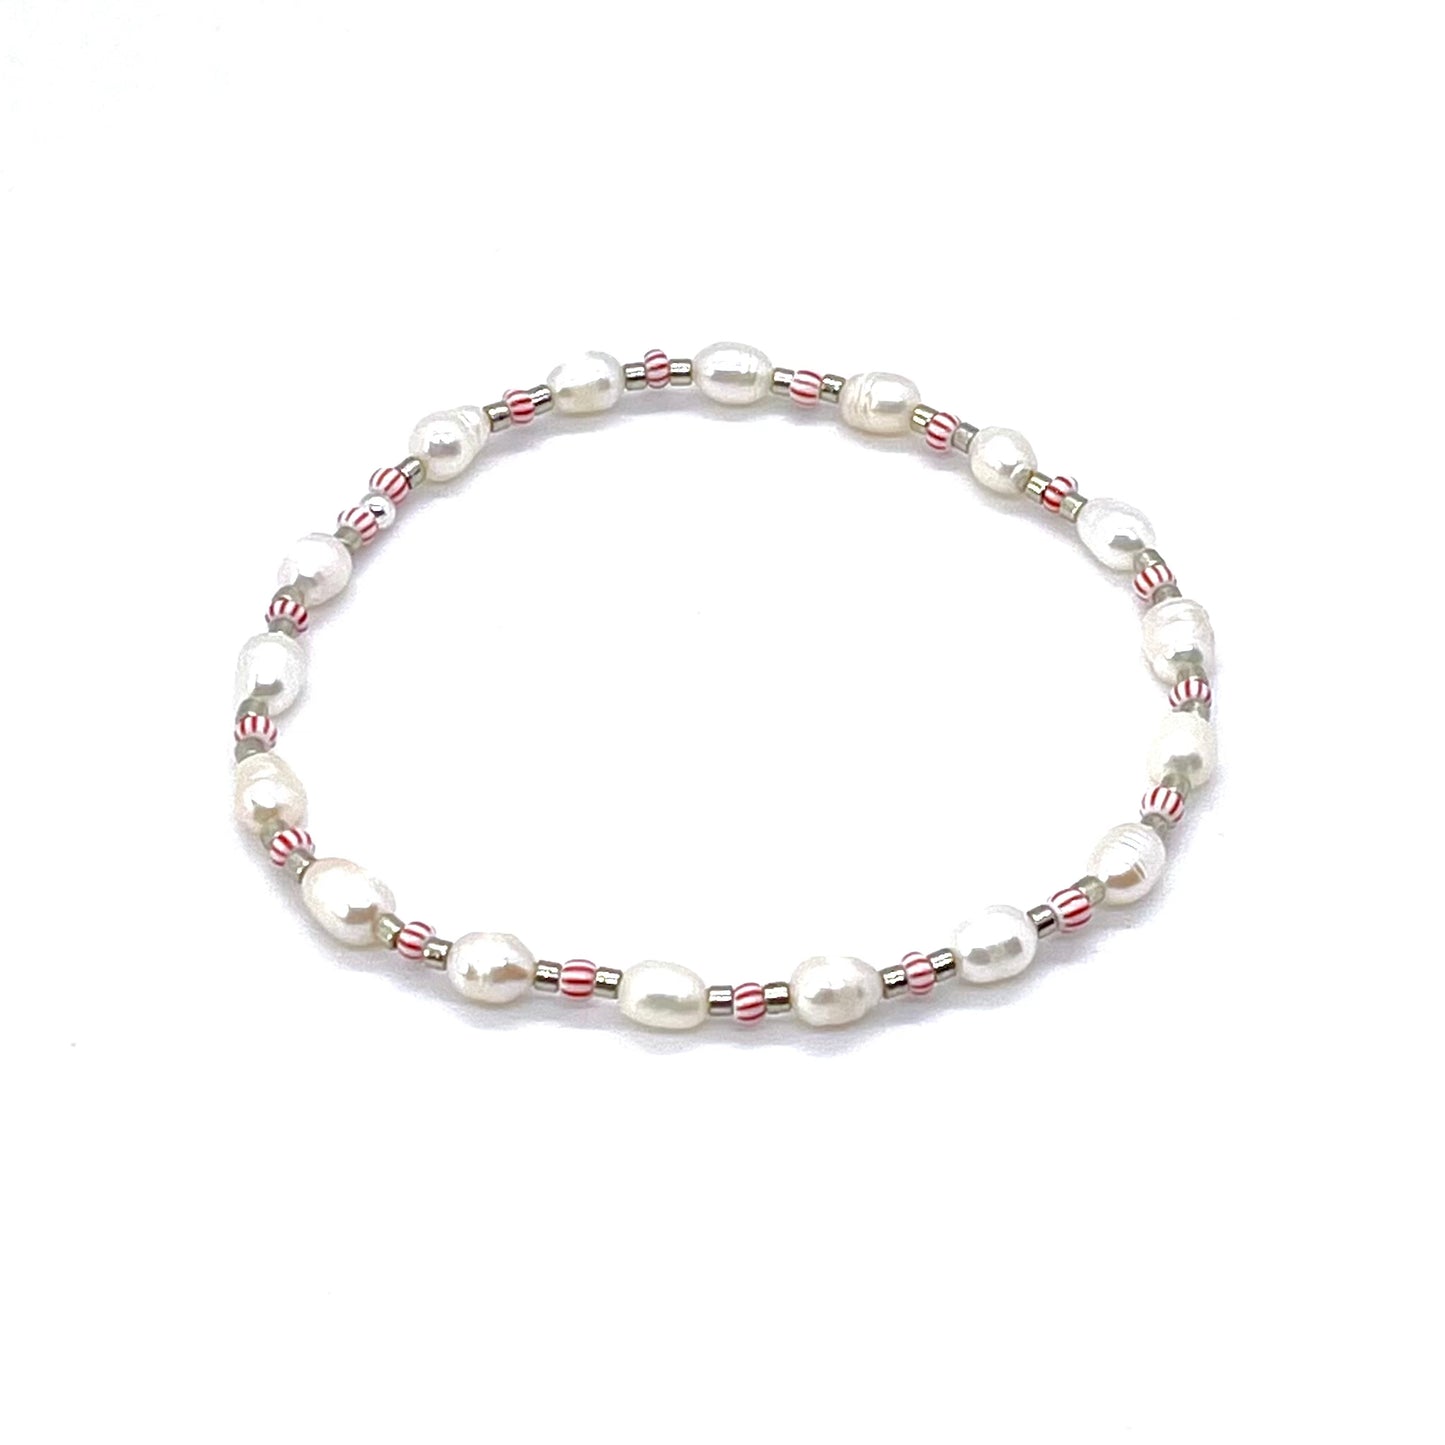 Pearl anklet with silver tone and red & white striped seed beads on elastic stretch cord.